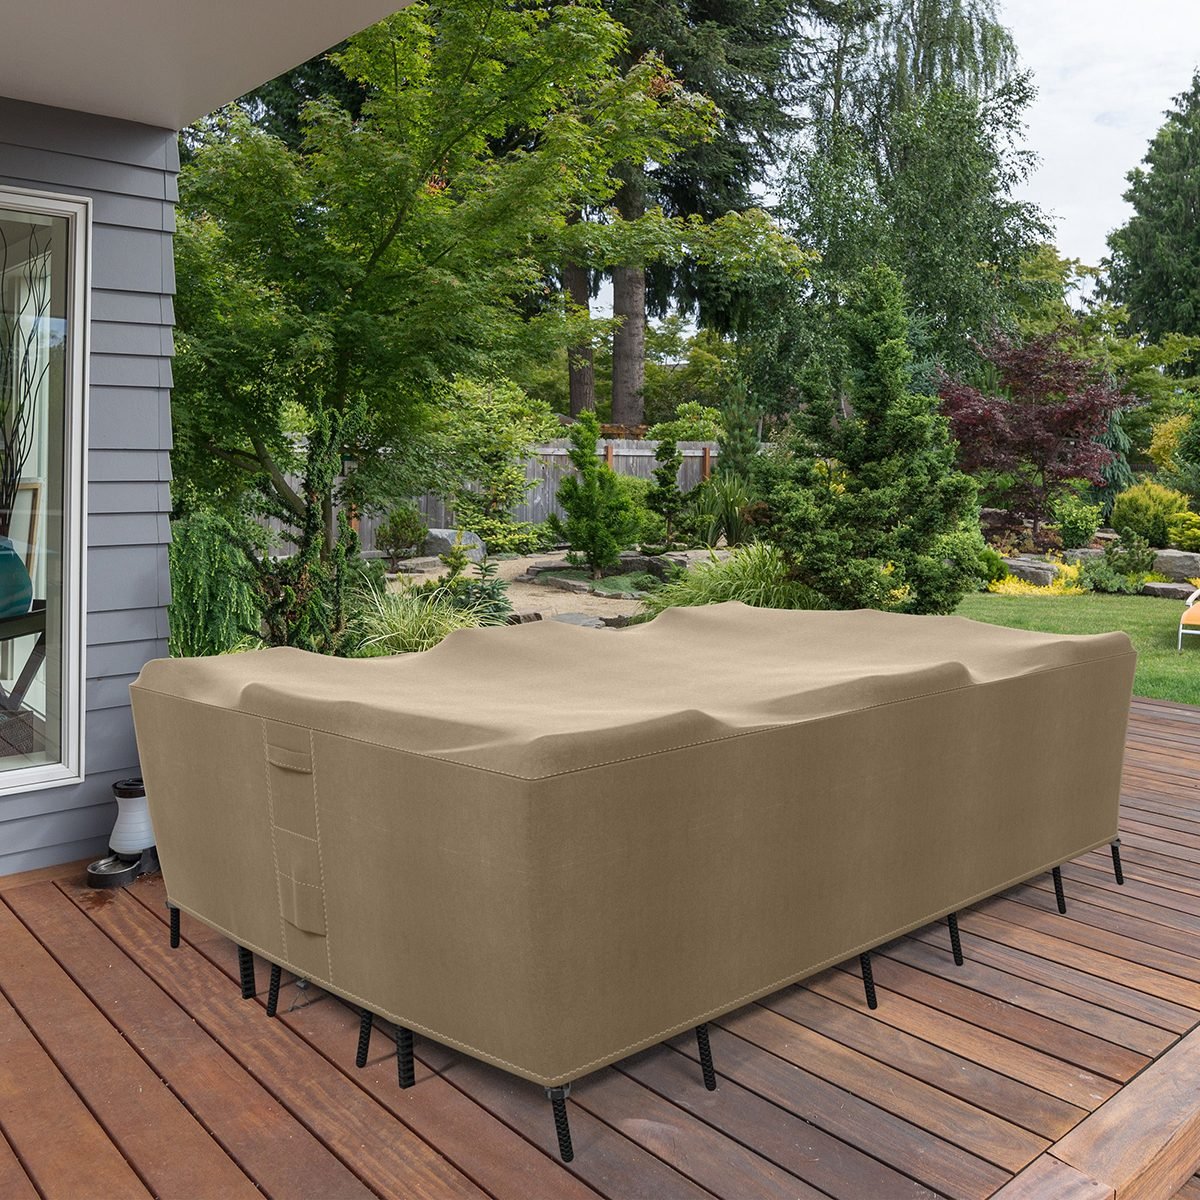 4 Patio Furniture Covers to Keep Your Seating Dry Through the Seasons